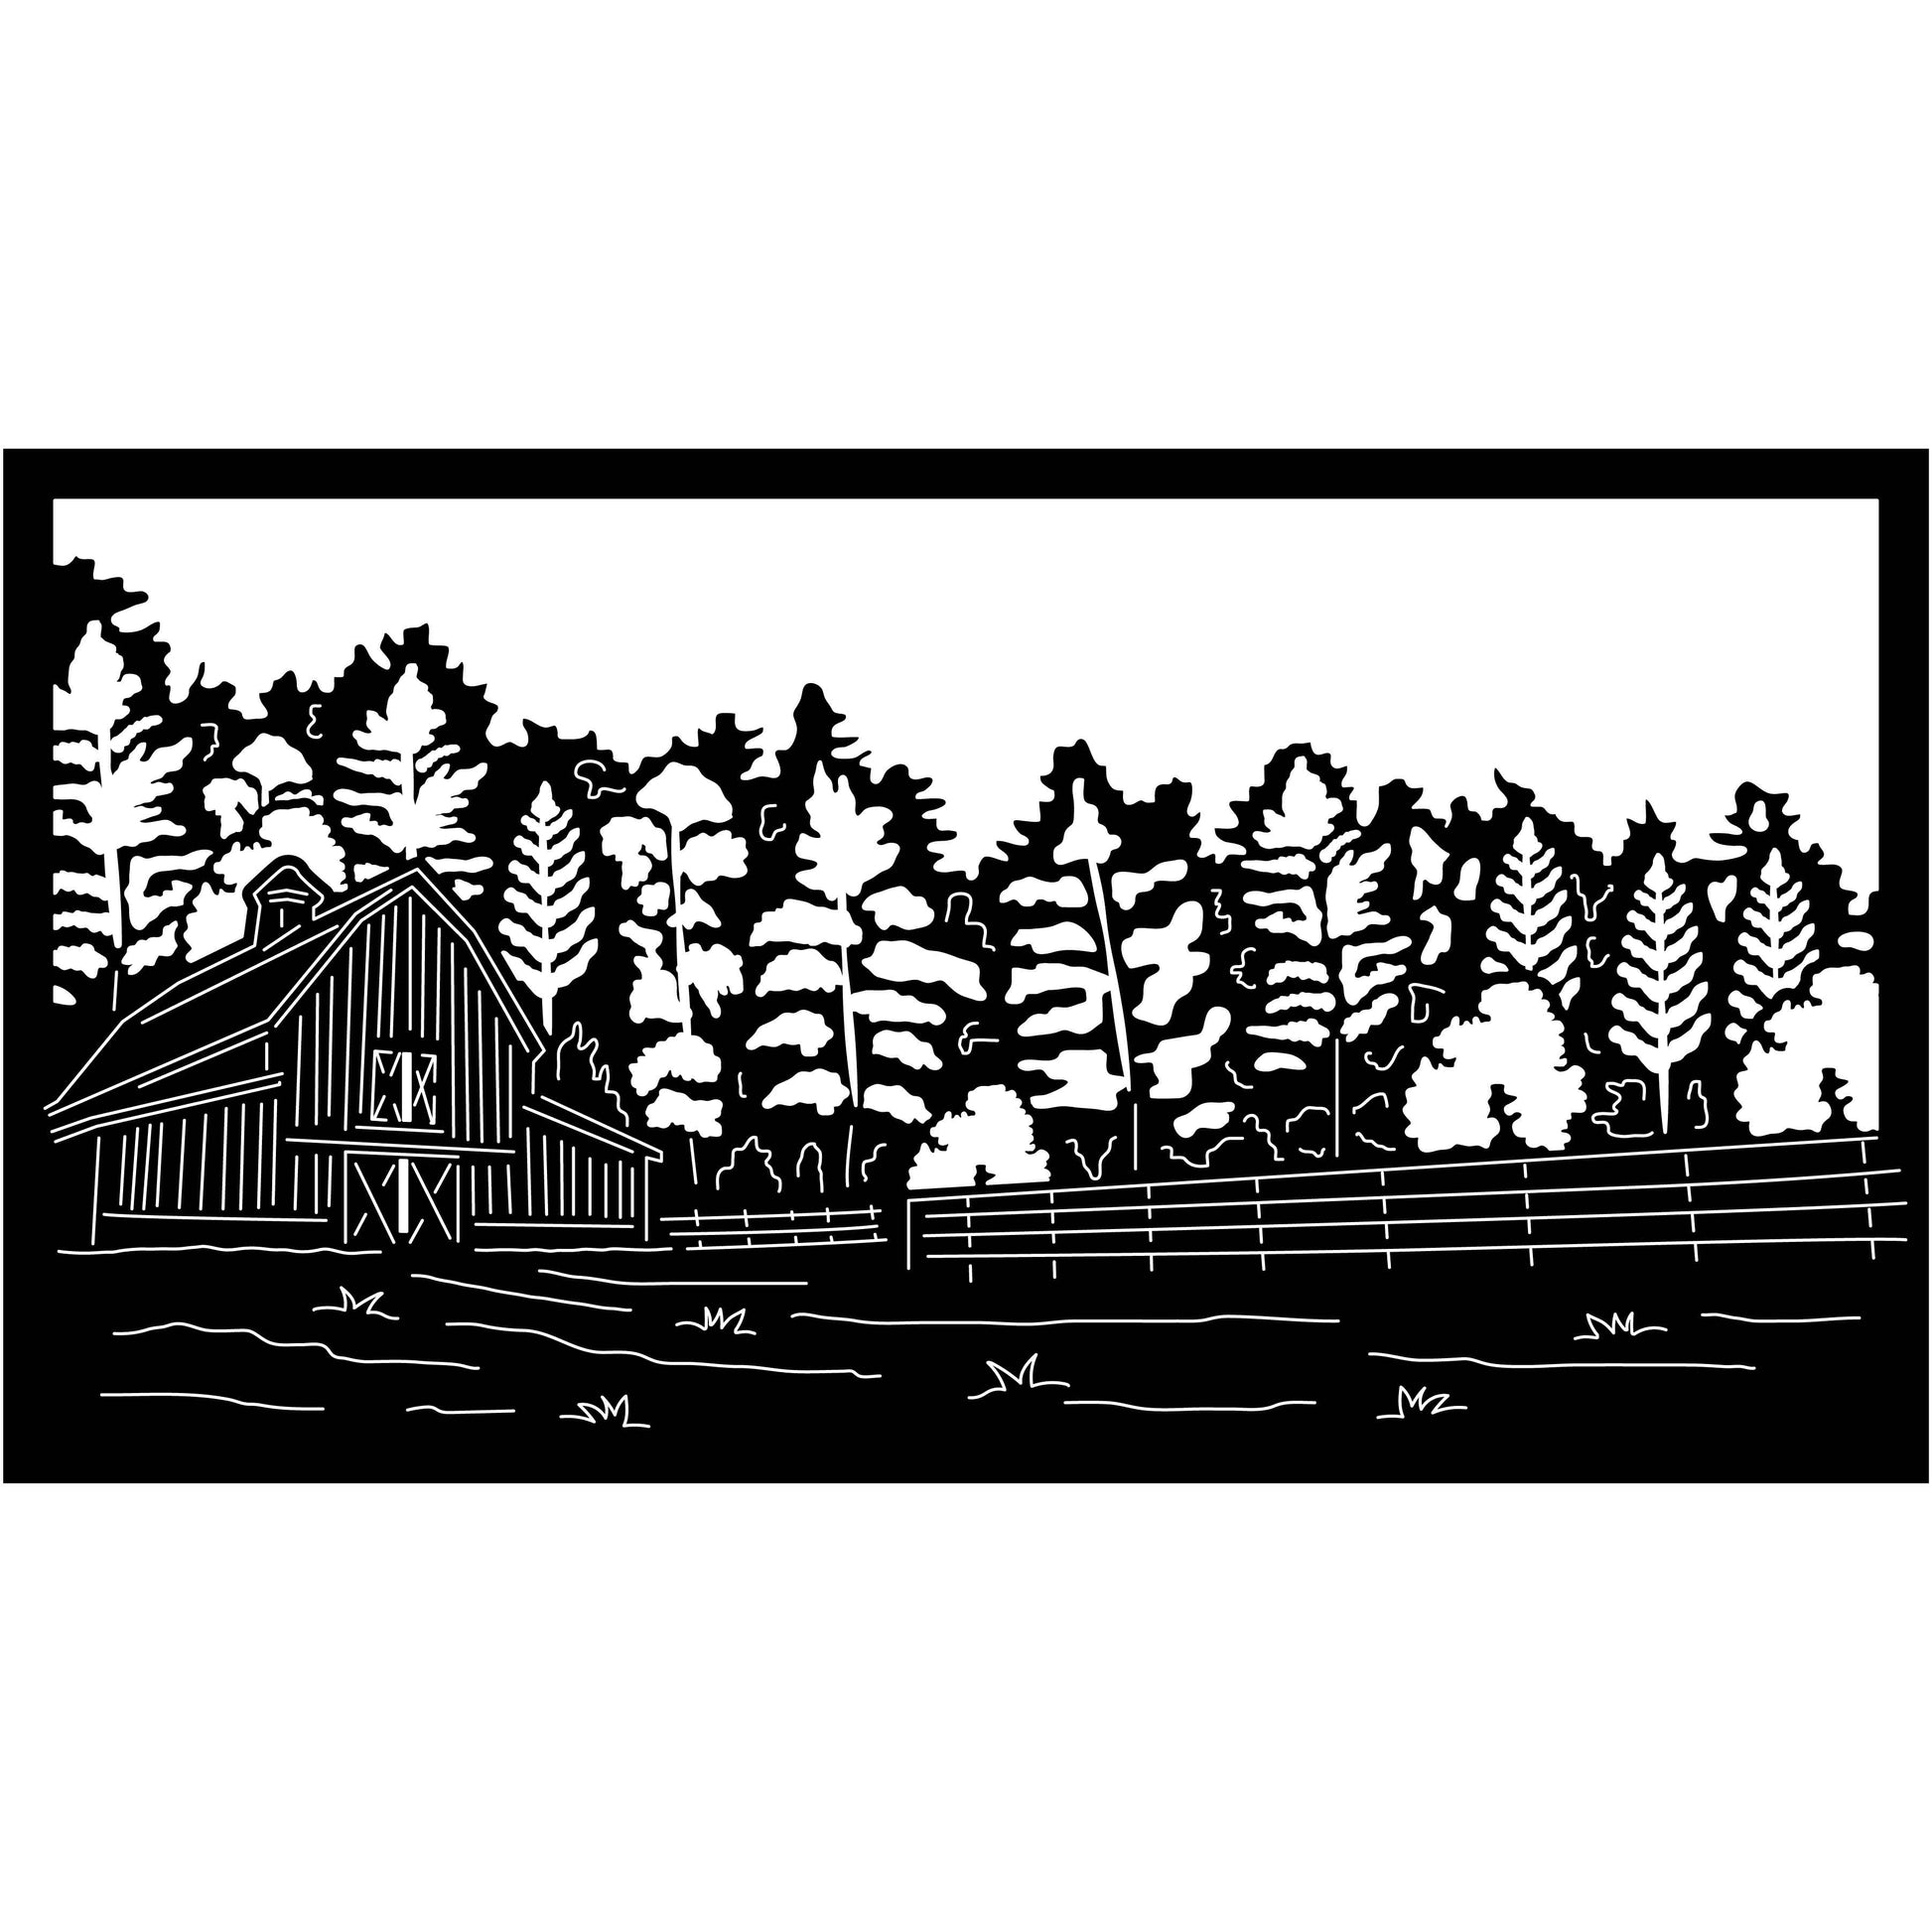 Barn and Trees Scene-DXF files Cut Ready for CNC-DXFforCNC.com